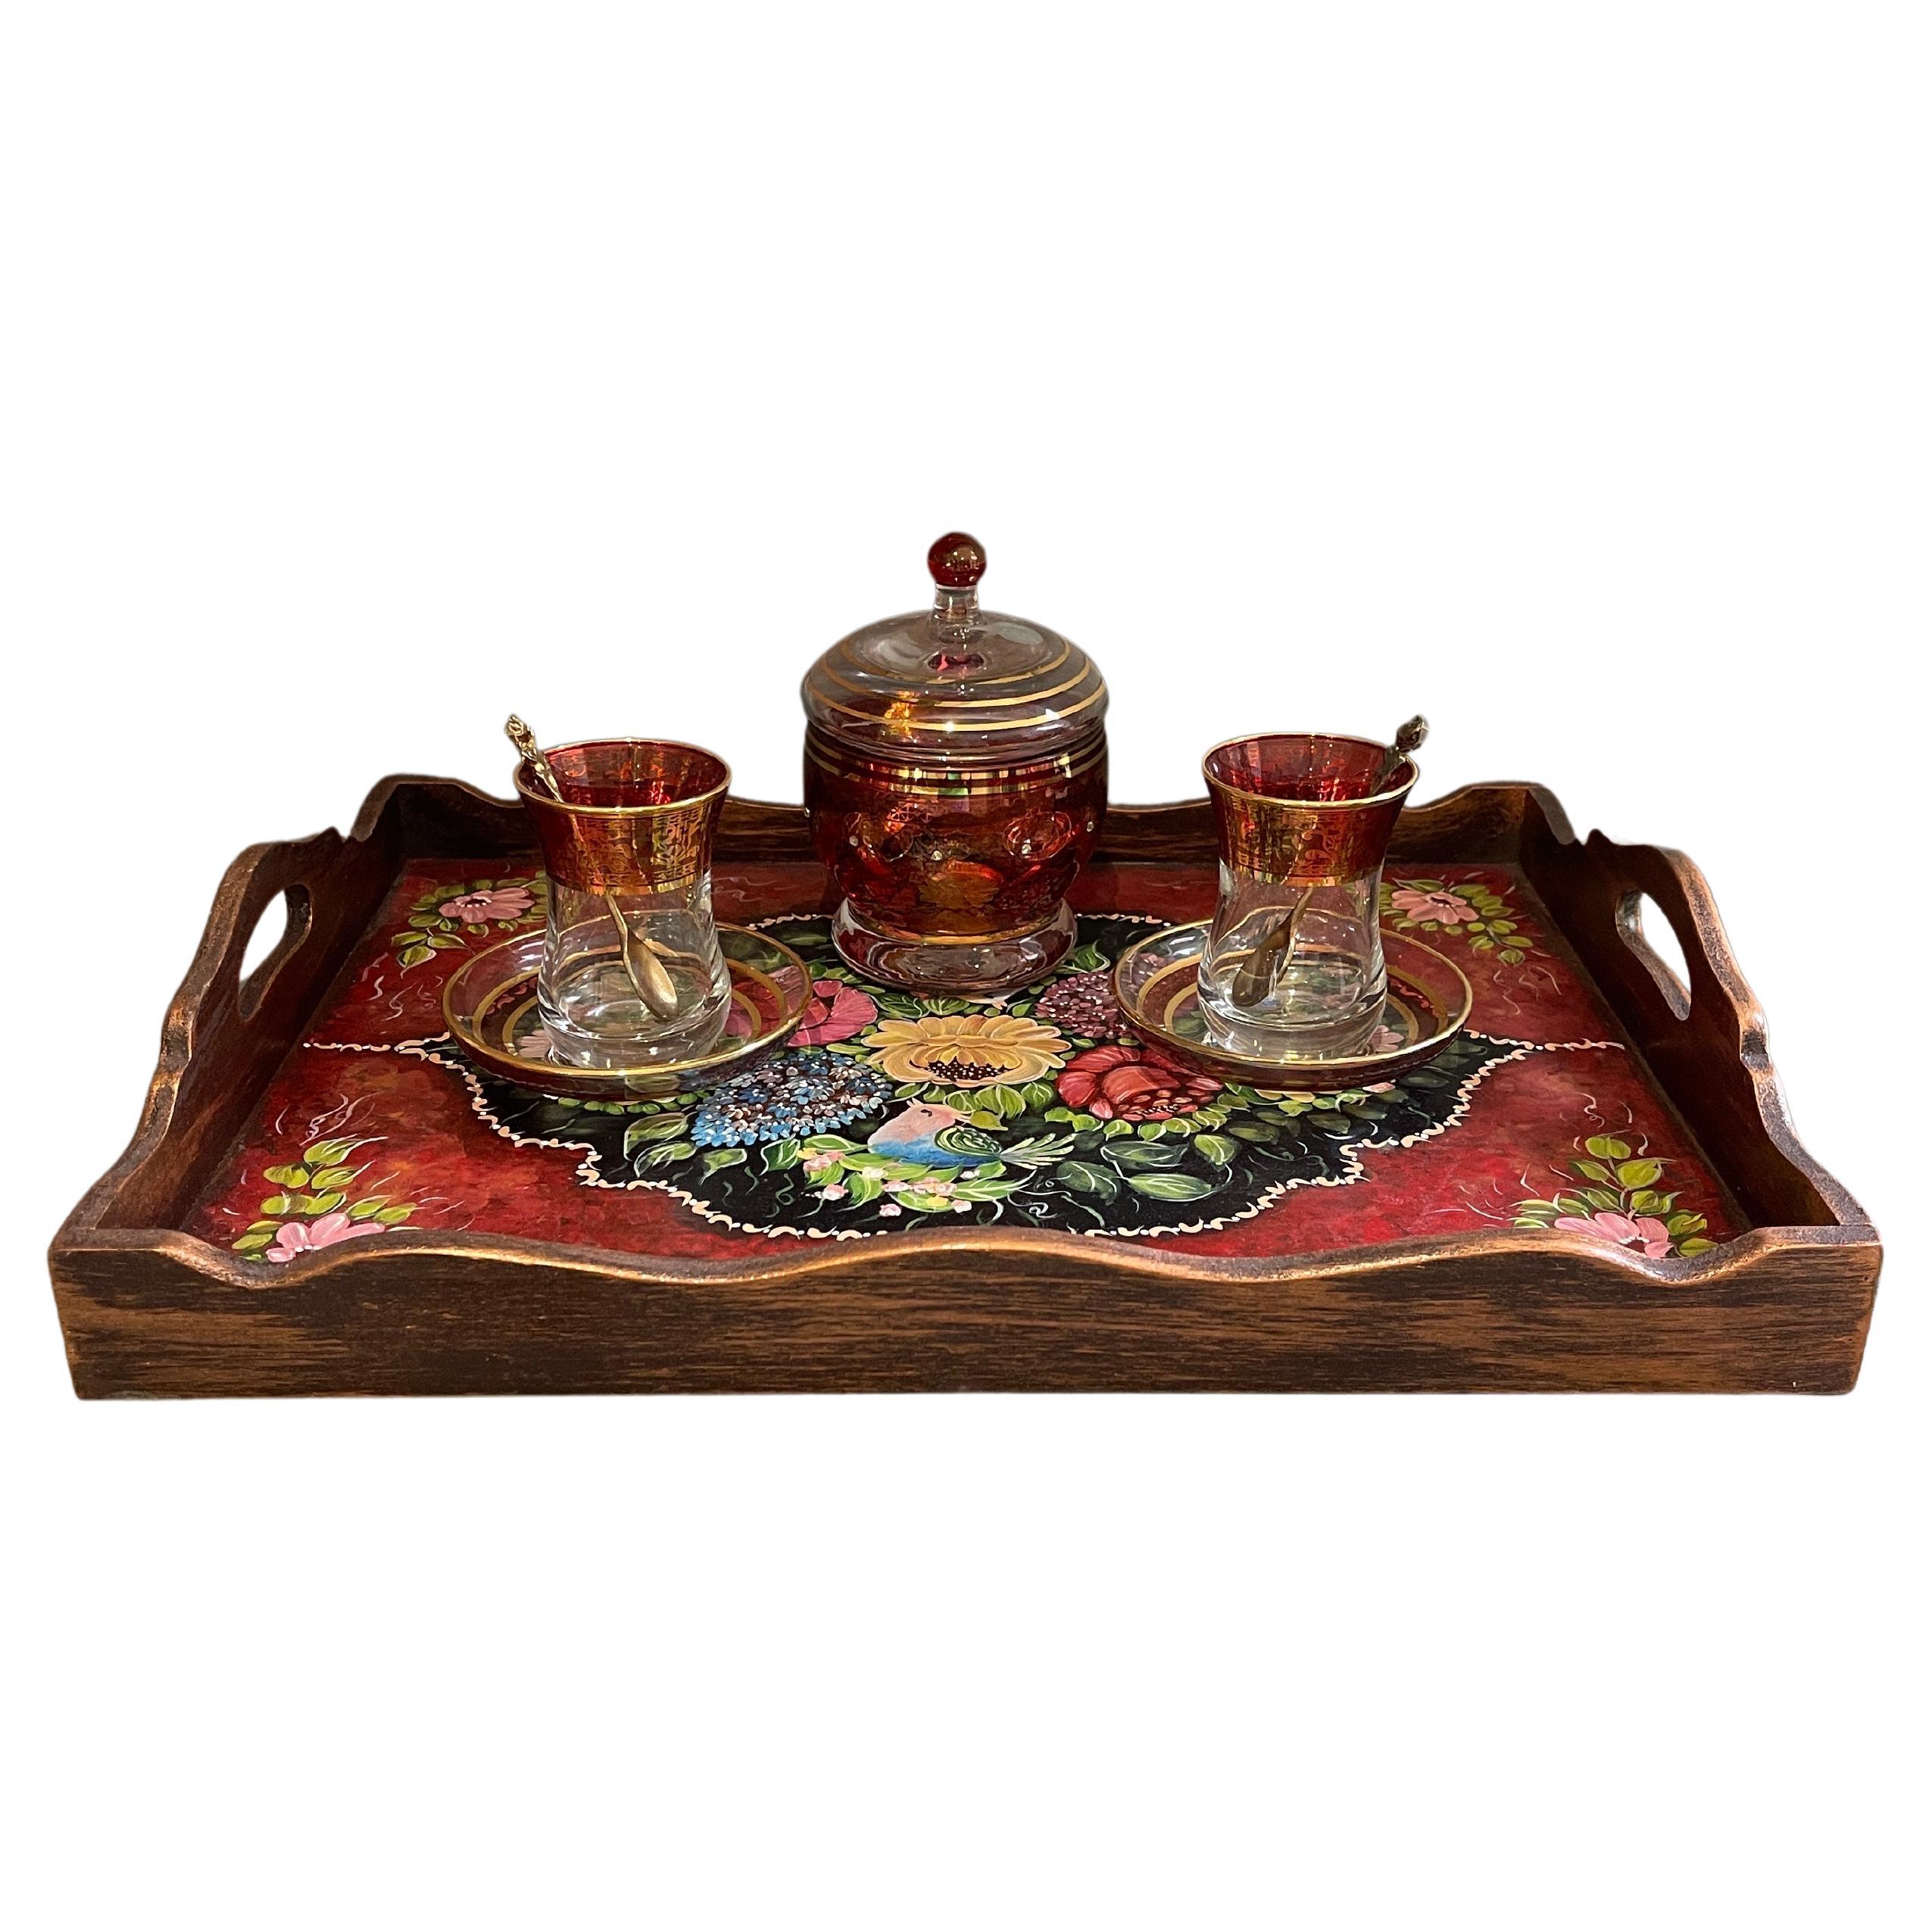 Satinwood Tea Tray Oriental Flower and Chicken Hand Painting Serving Tray with Handle.
Decorative objects for your home decor.
Impressive Flame Brown Mahogany Double Tea Tray of Outstanding Quality, Workmanship, and Compact Size. Circa